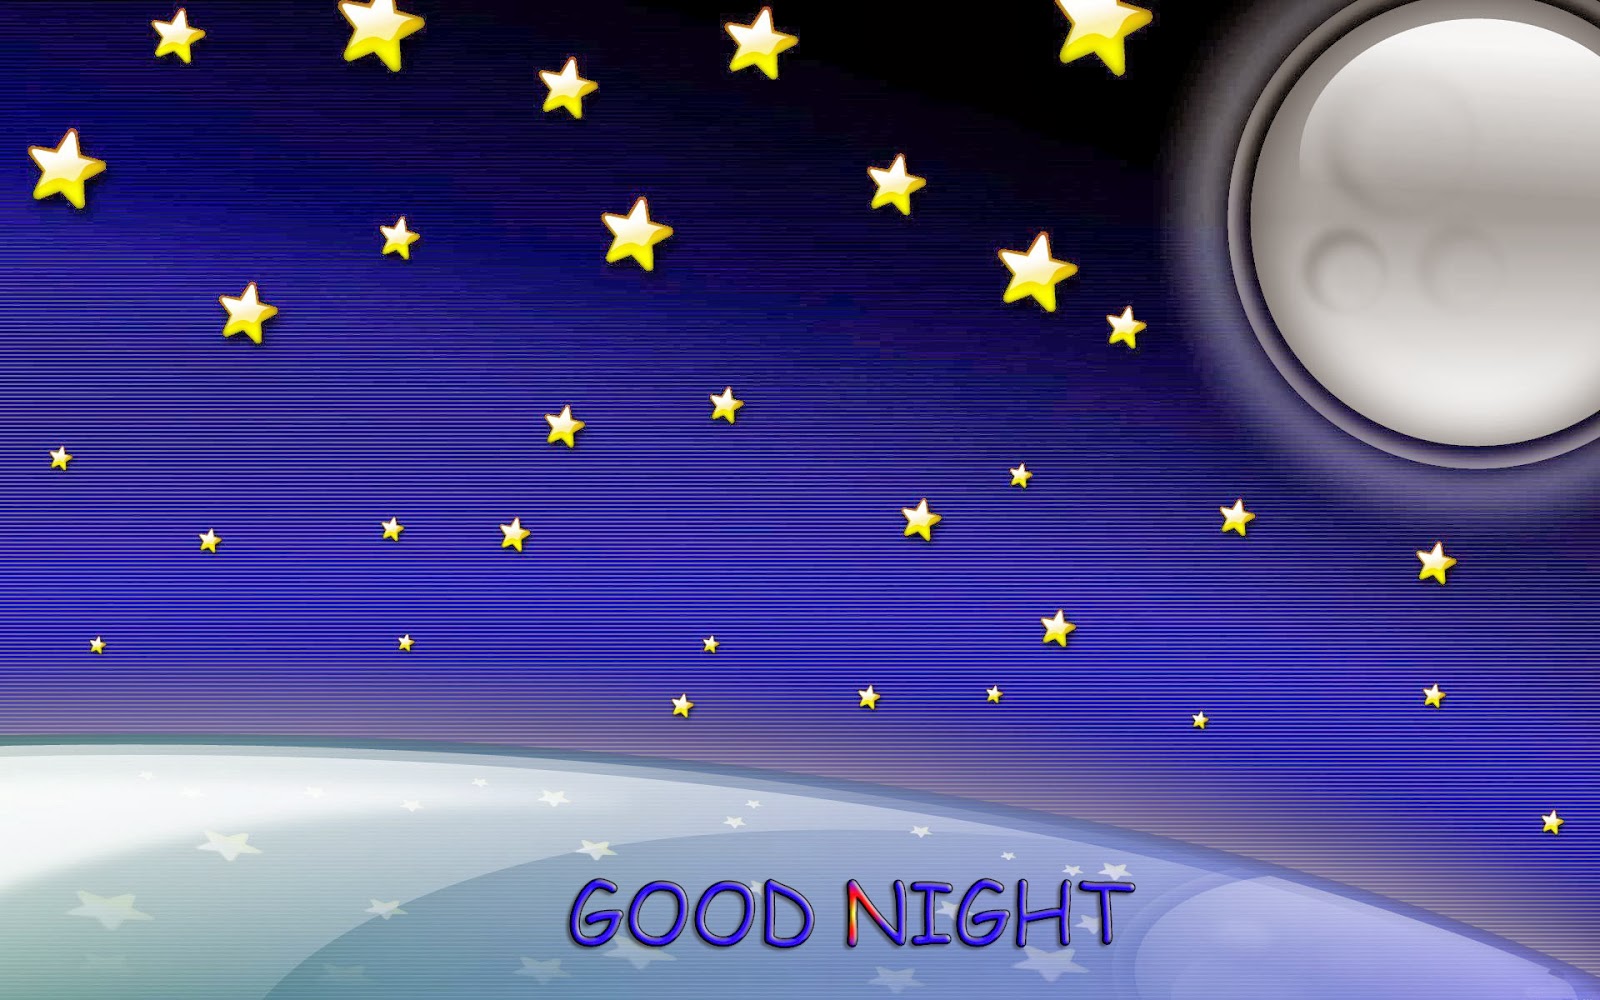 Image Background HD Gud Night Pictures